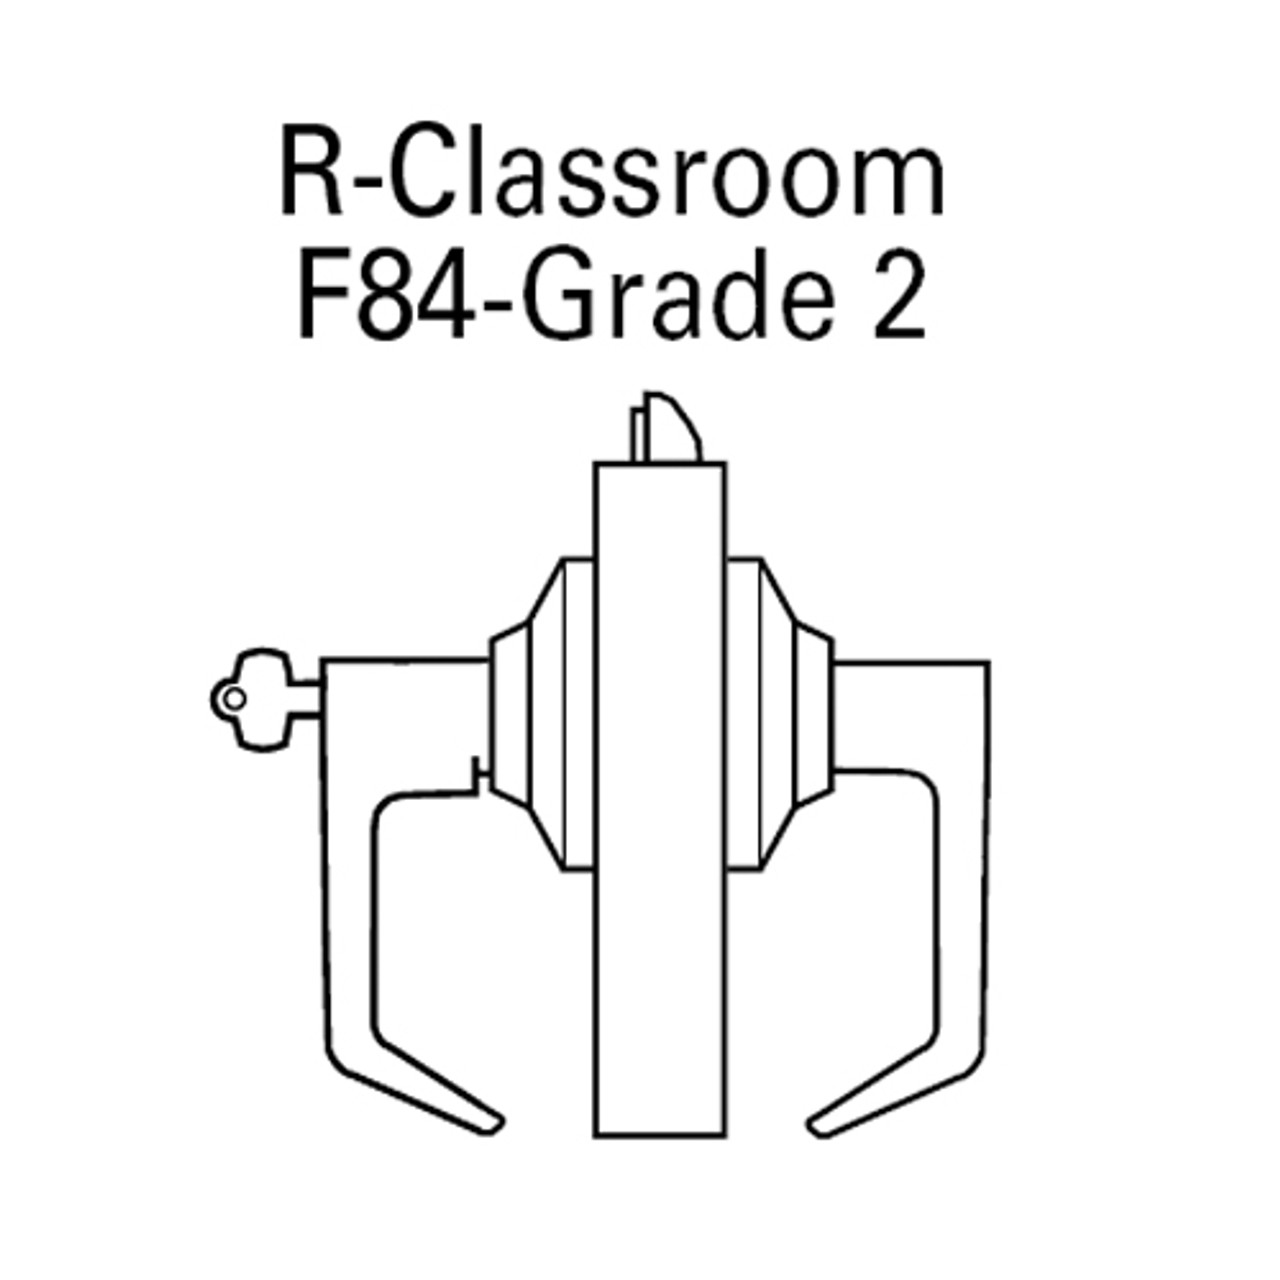 7KC37R14DSTK613 Best 7KC Series Classroom Medium Duty Cylindrical Lever Locks with Curved Return Design in Oil Rubbed Bronze